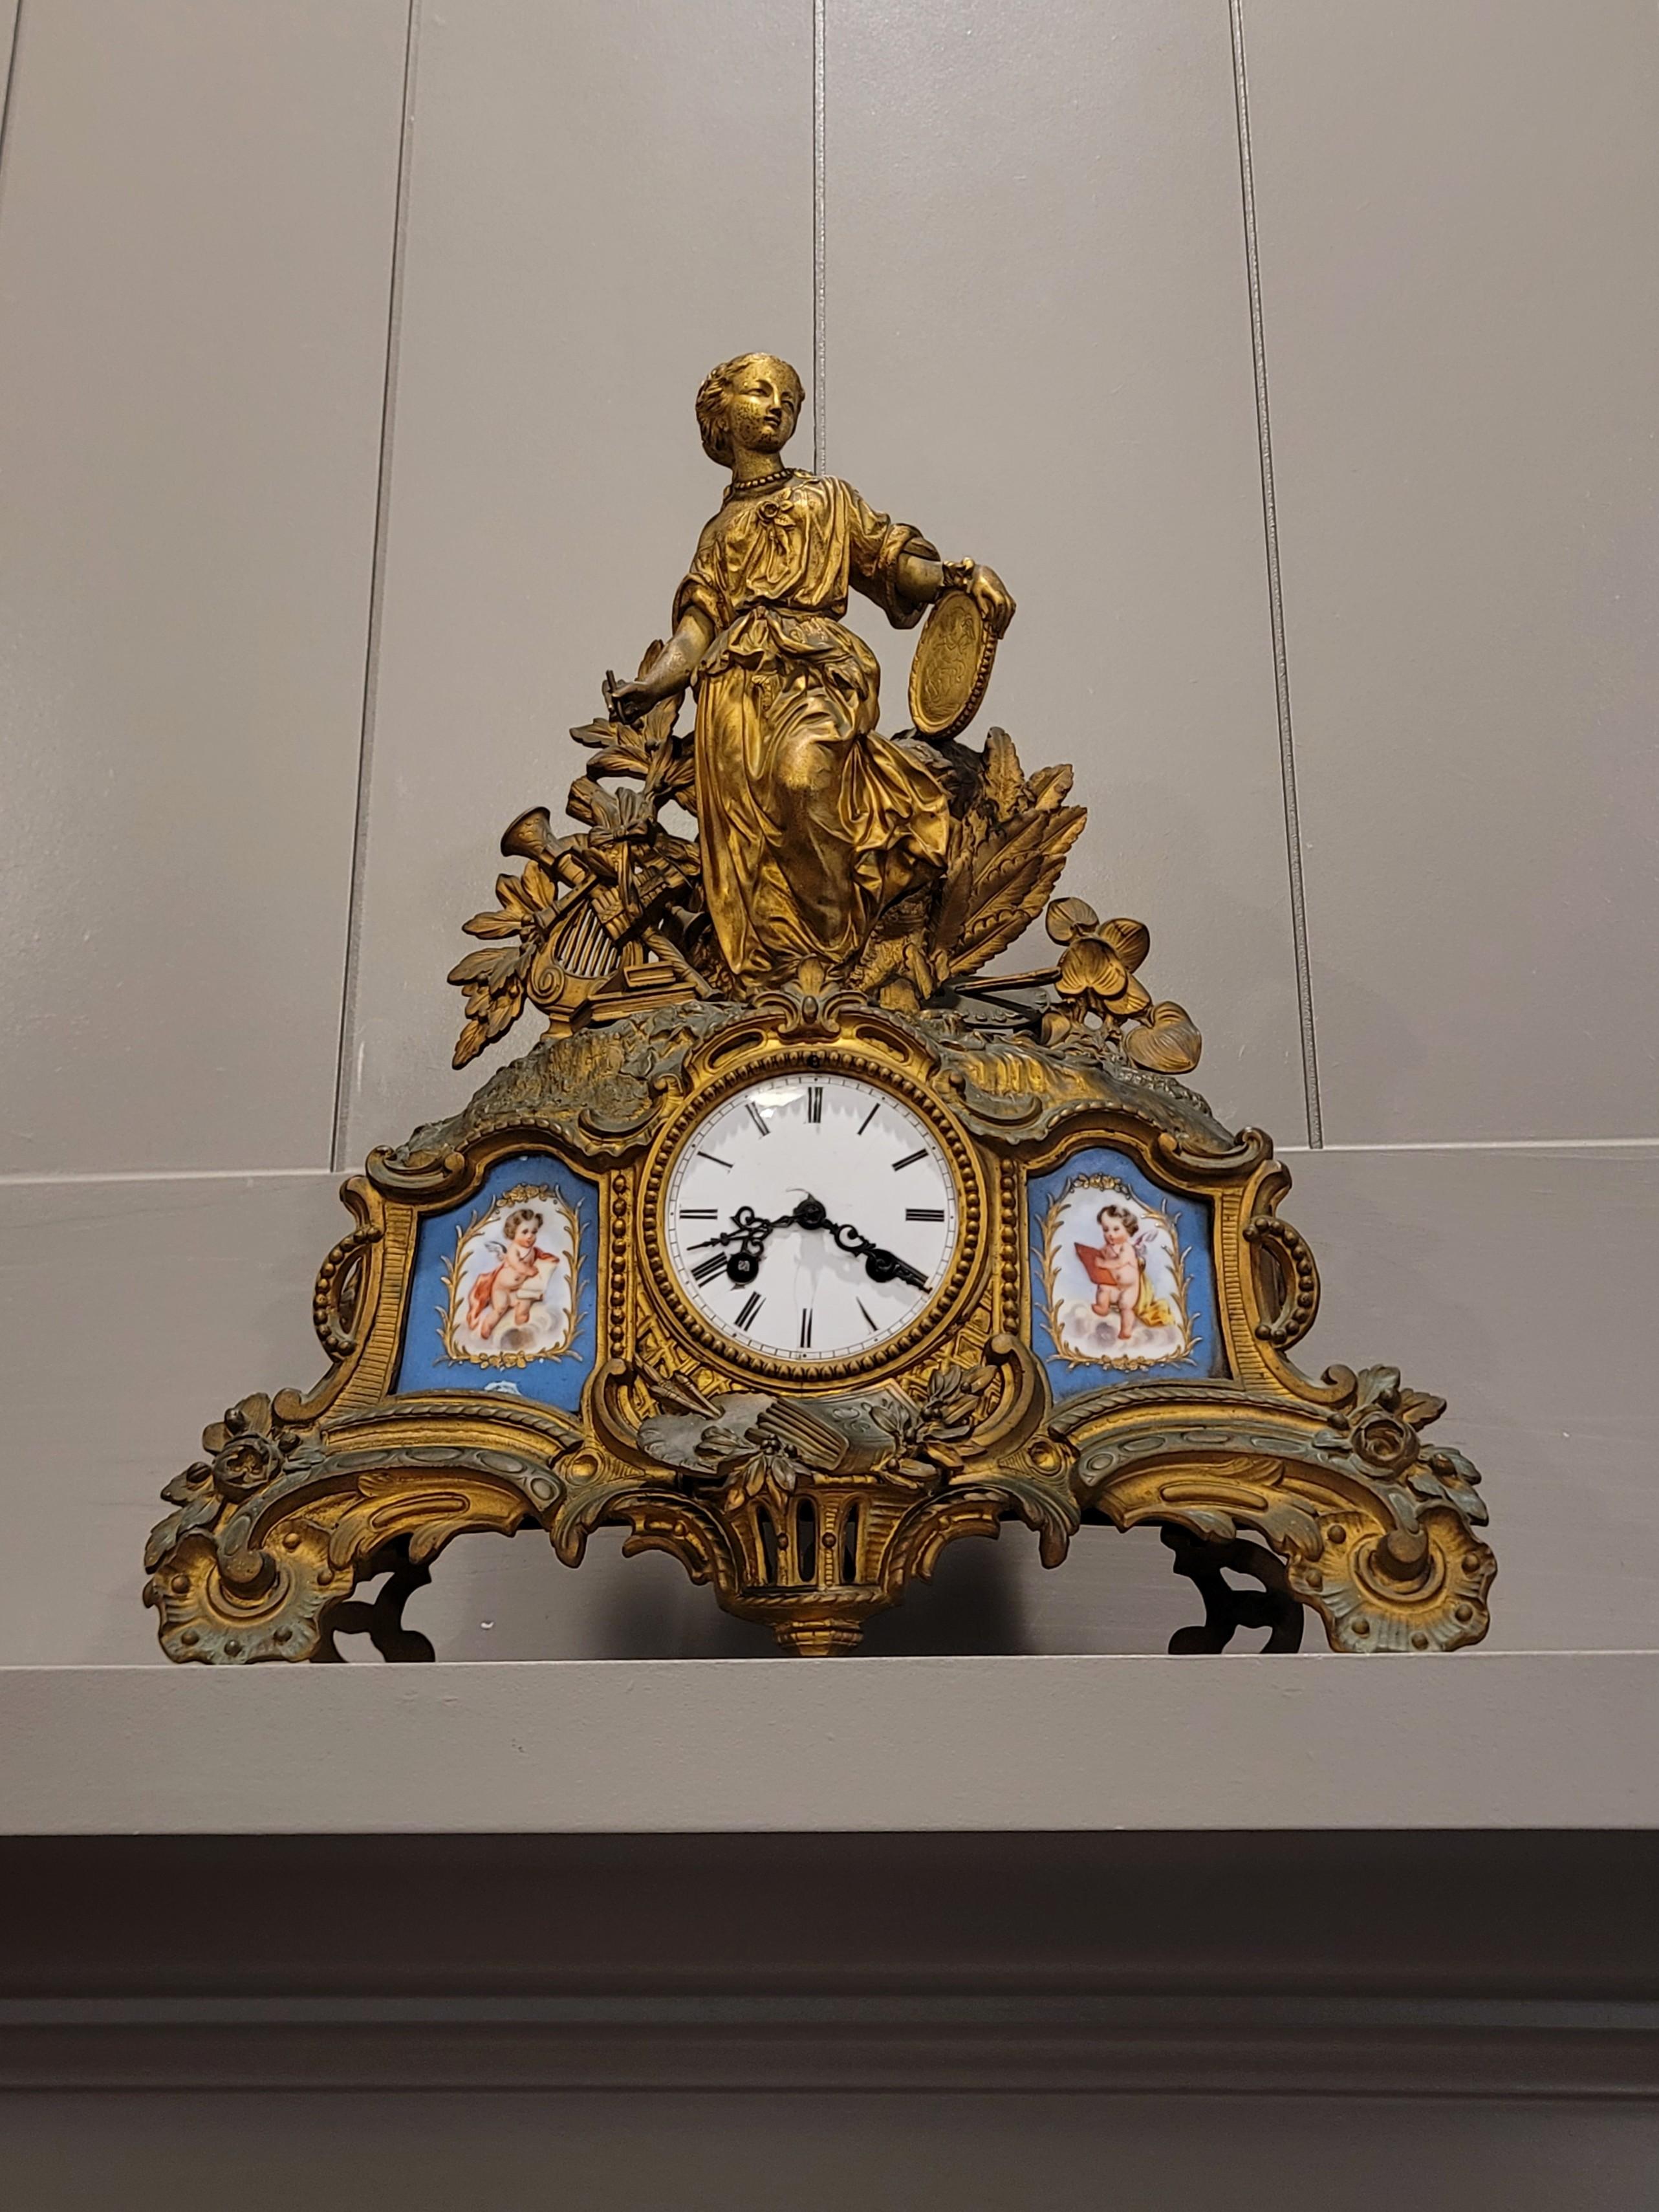 A fabulous French antique, circa 1850, Sevres style porcelain mounted gilt metal mantel clock by Parisian sculptor and merchant Louis Hottot (1829-1905), with stamped Japy Freres silk thread suspension movement.

Born in Paris, France, in the